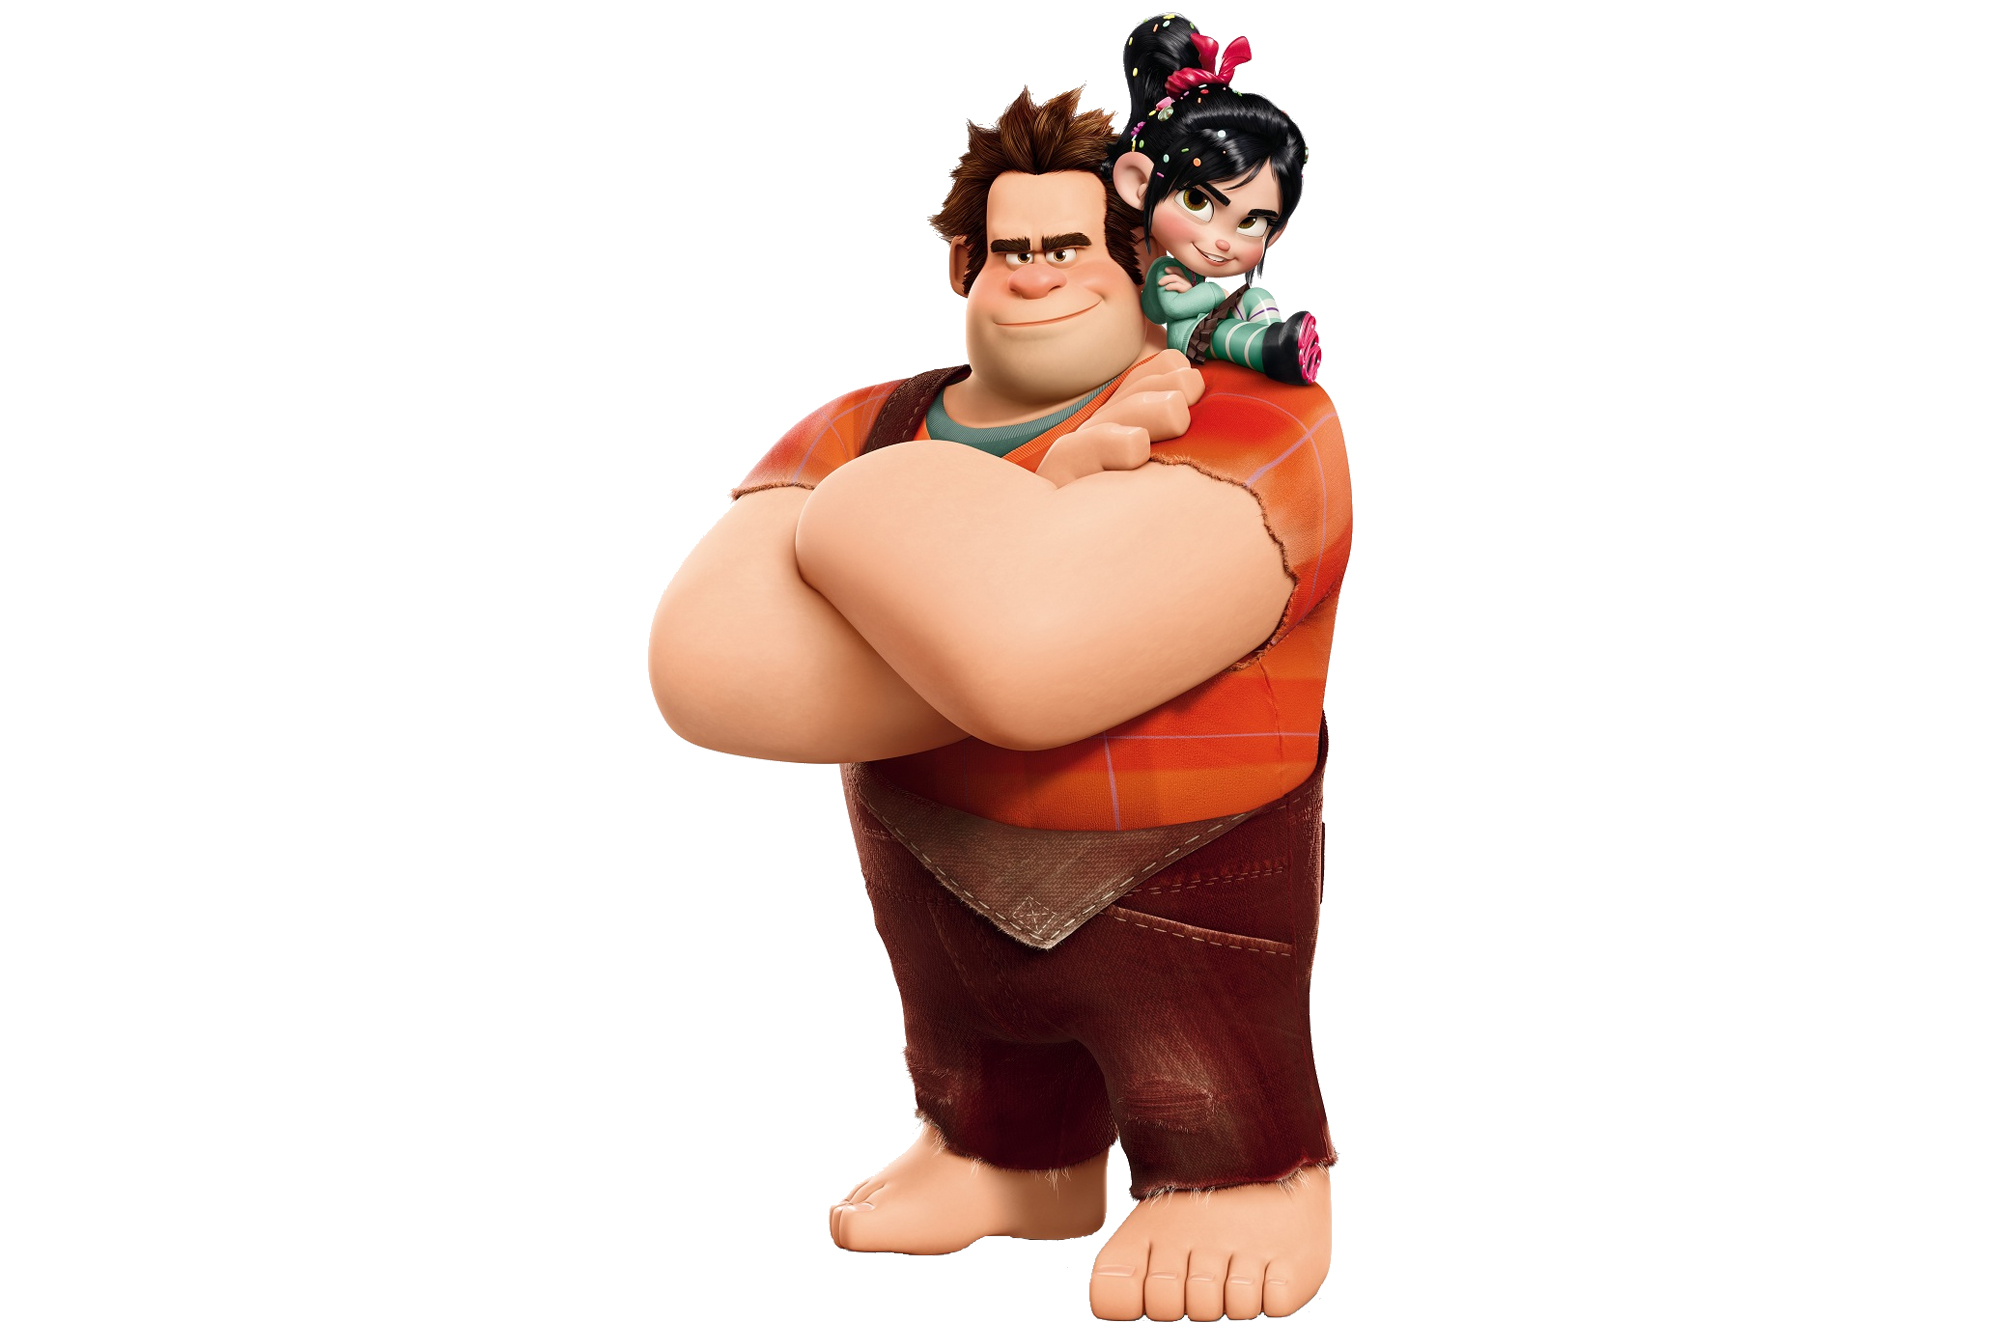 RUMOR: Wreck-It Ralph Meet and Greet Coming to Epcot.